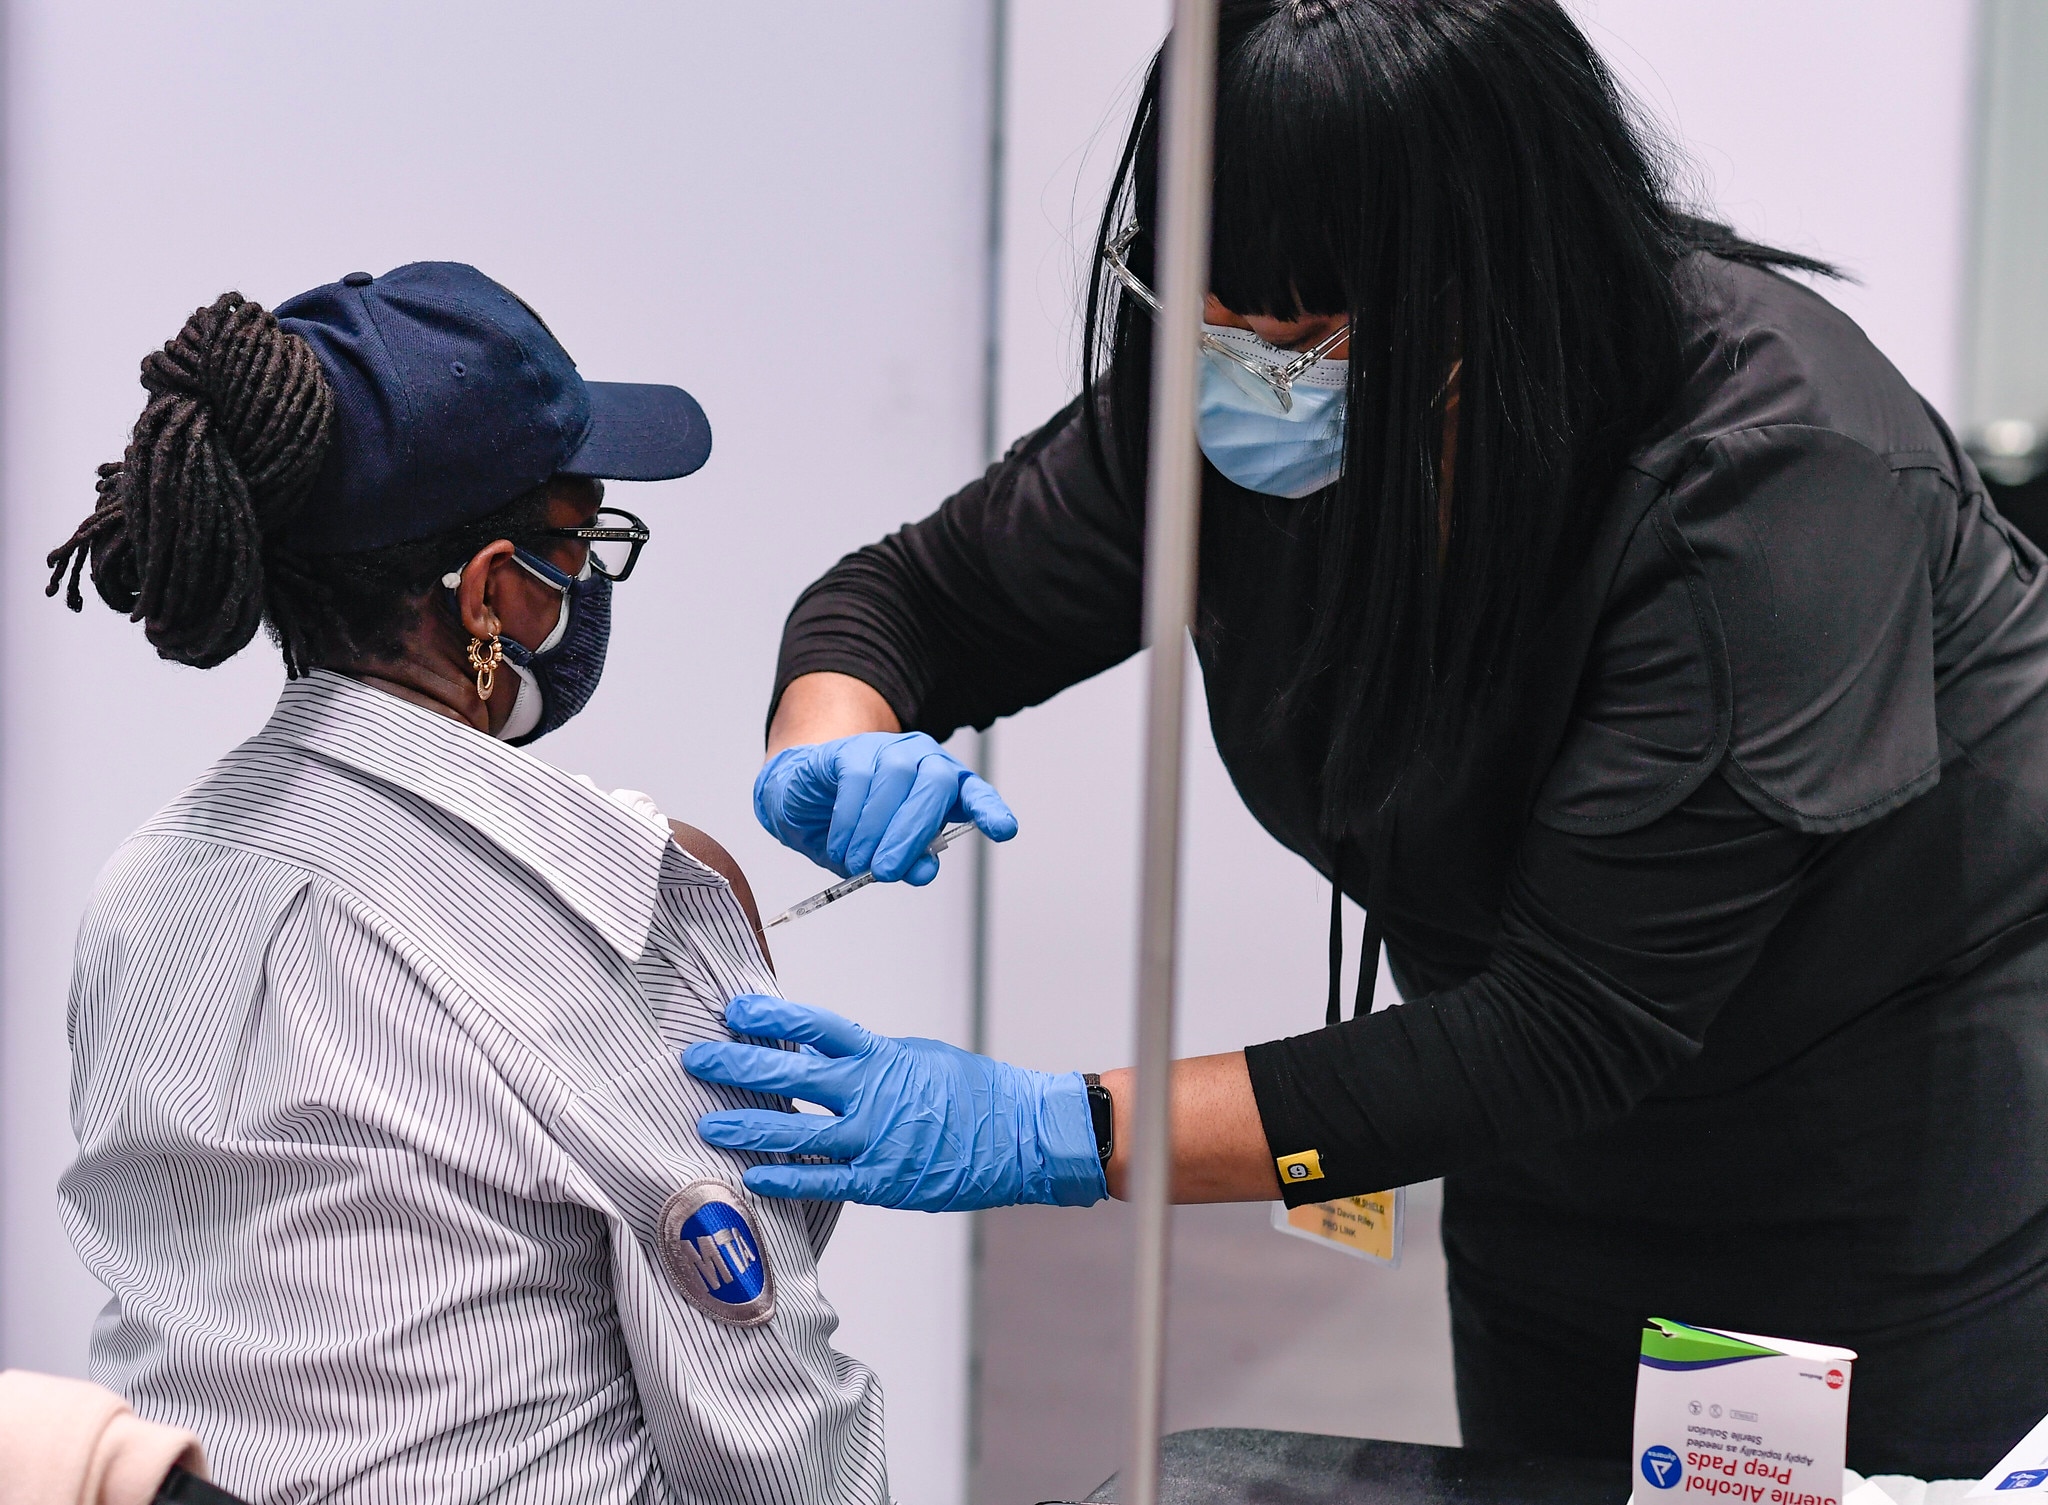 PHOTOS: MTA’s Heroic Frontline Workers Begin COVID-19 Vaccinations Today at Javits Center